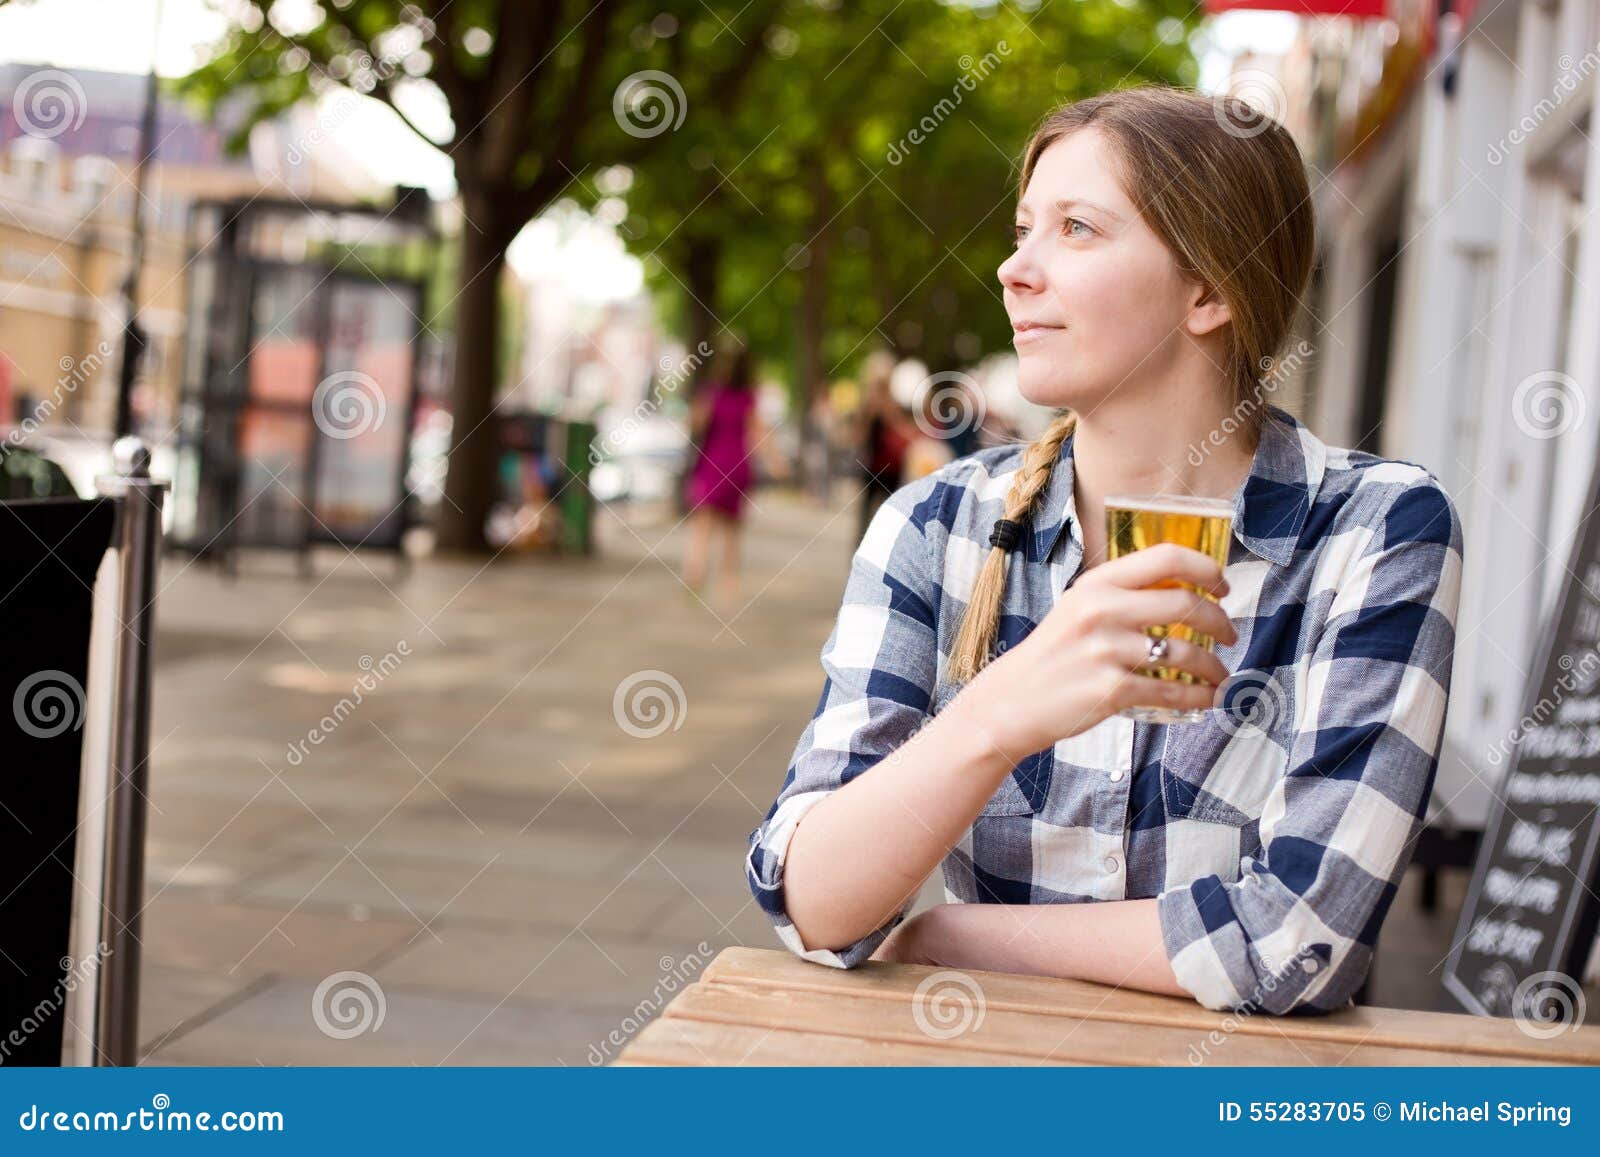 Having a drink stock image. Image of relax, beer, fresh - 55283705